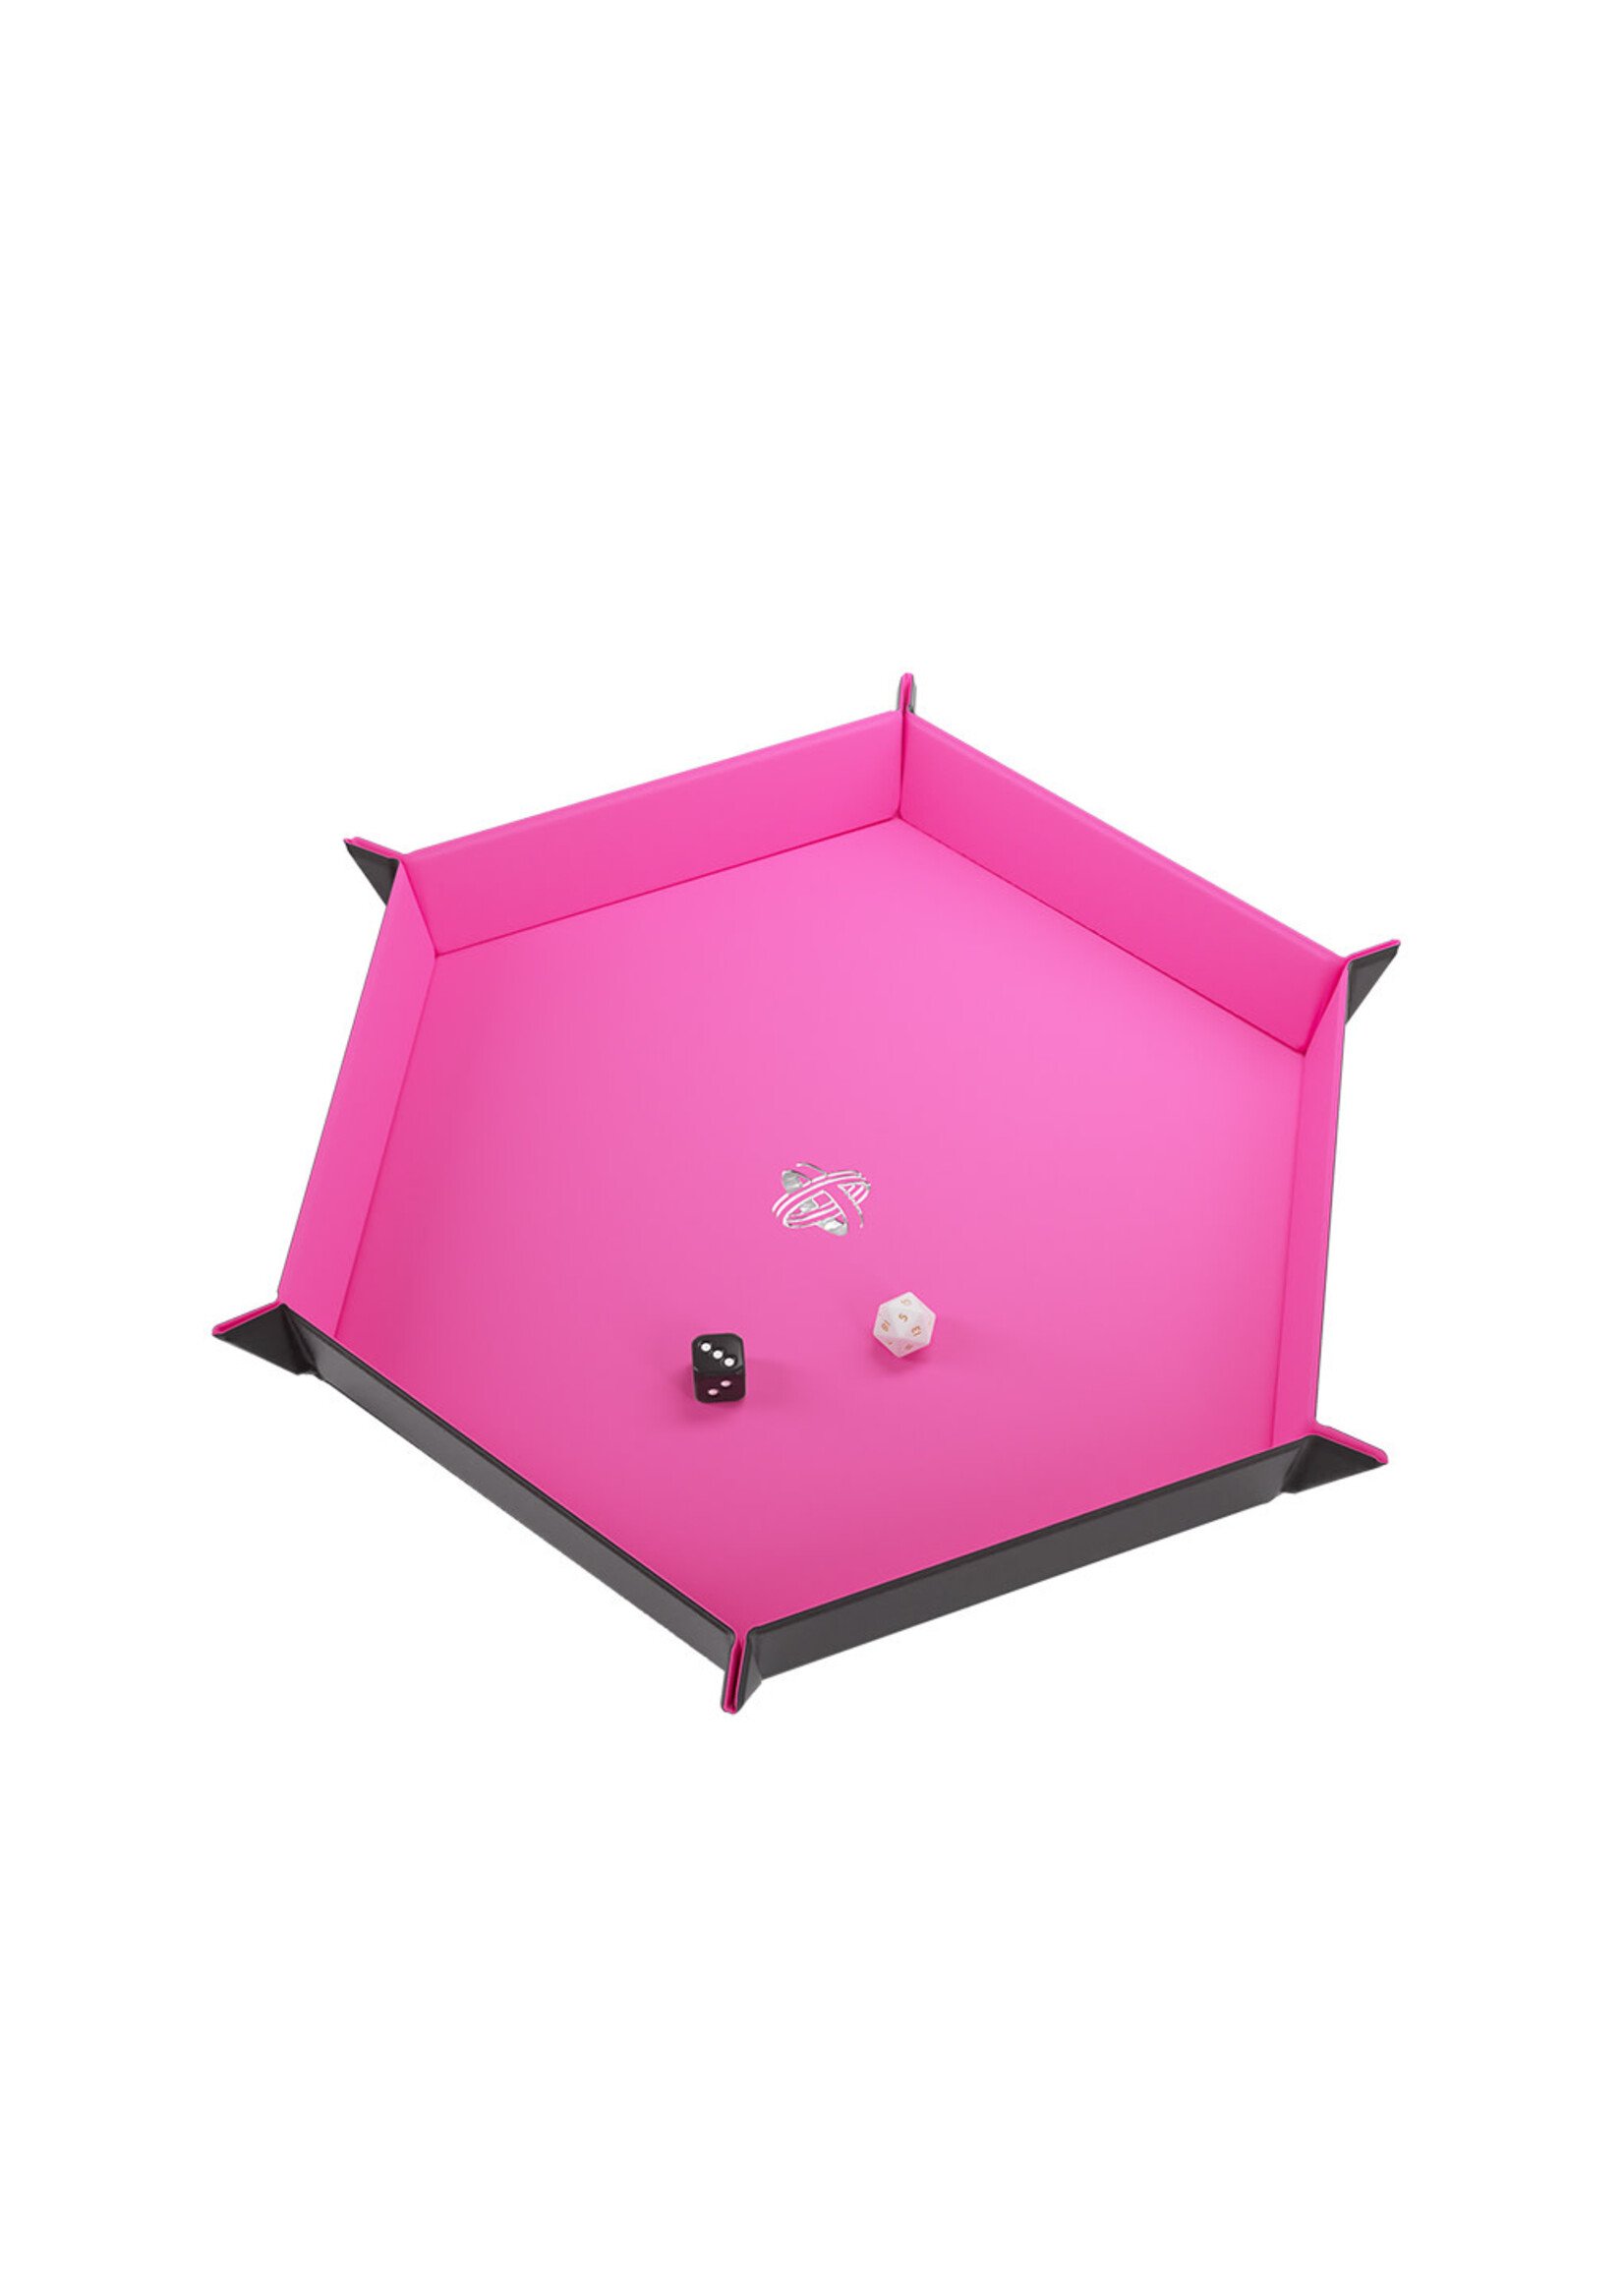 Gamegenic Magnetic Dice Tray Large Hexagonal Black w/ Pink